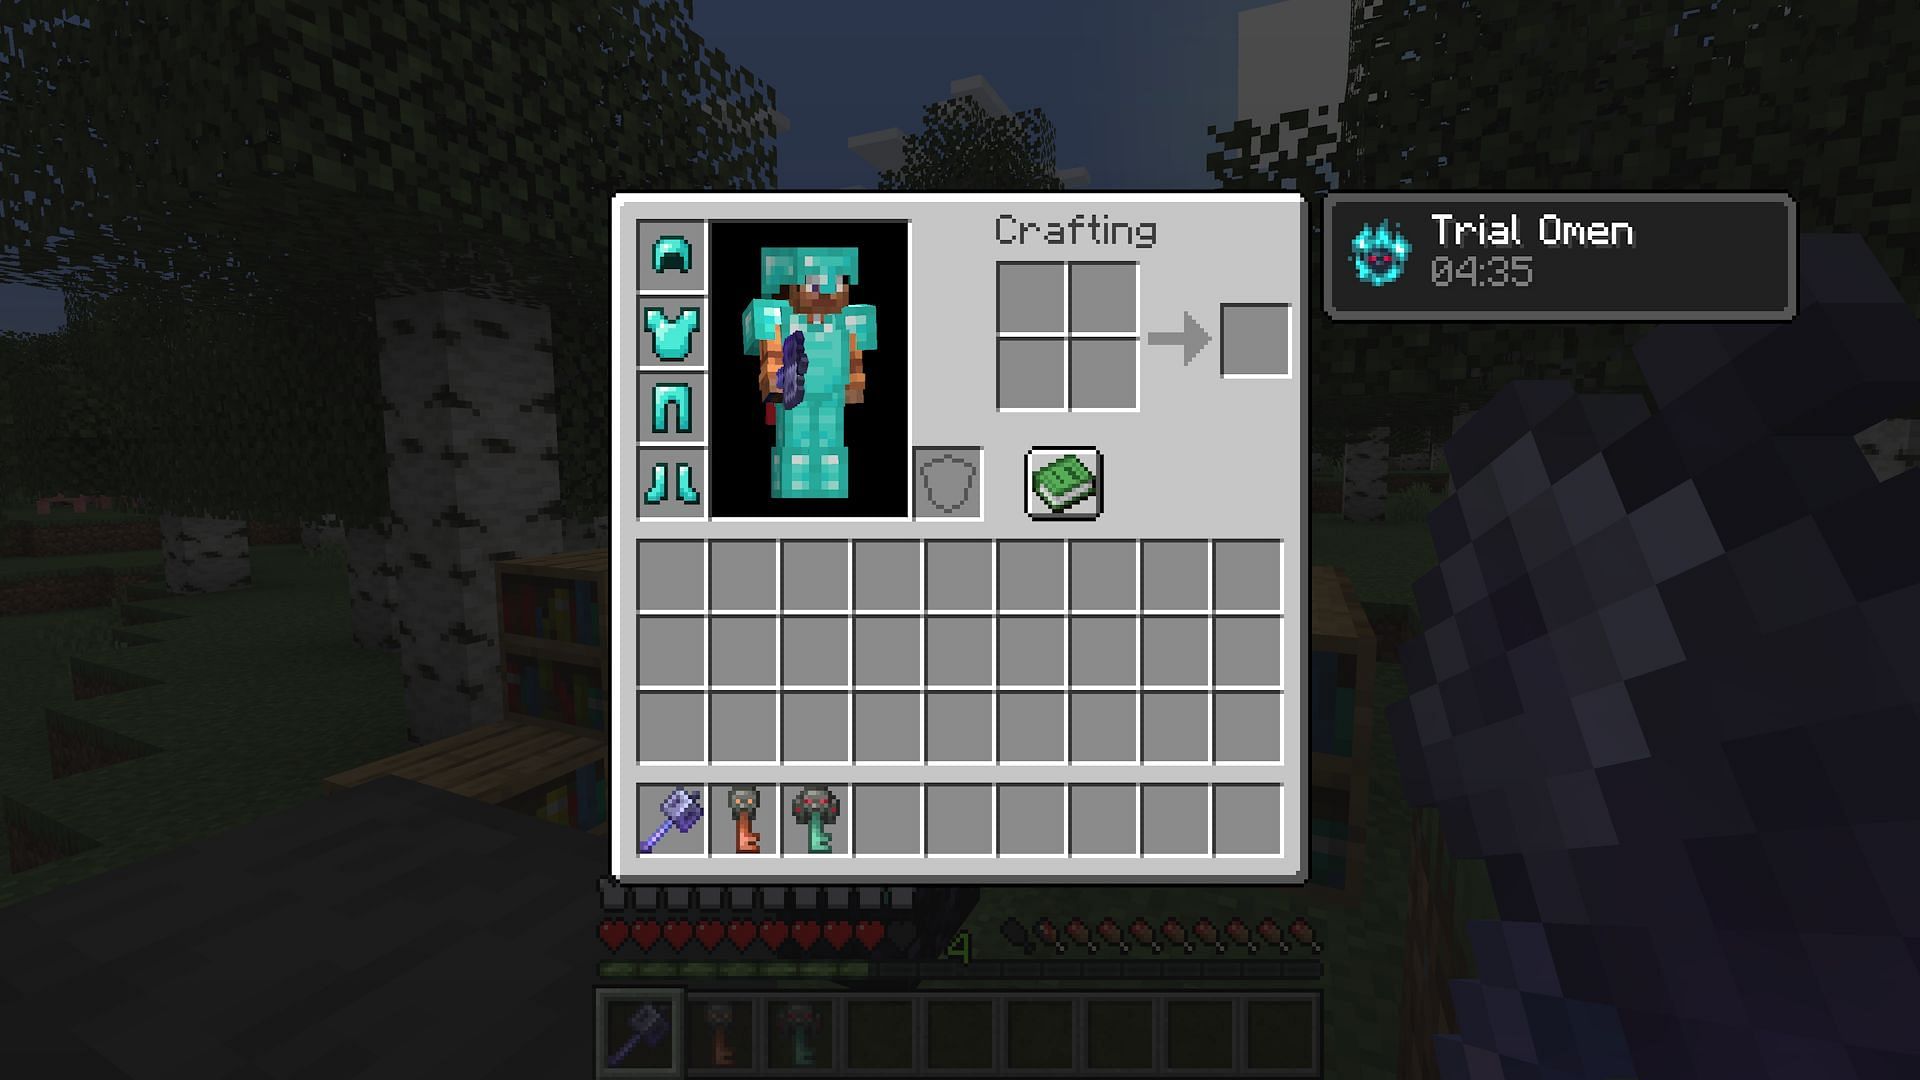 Trial omen is hopefully one of many new branching paths of bad omen to come (Image via Mojang)